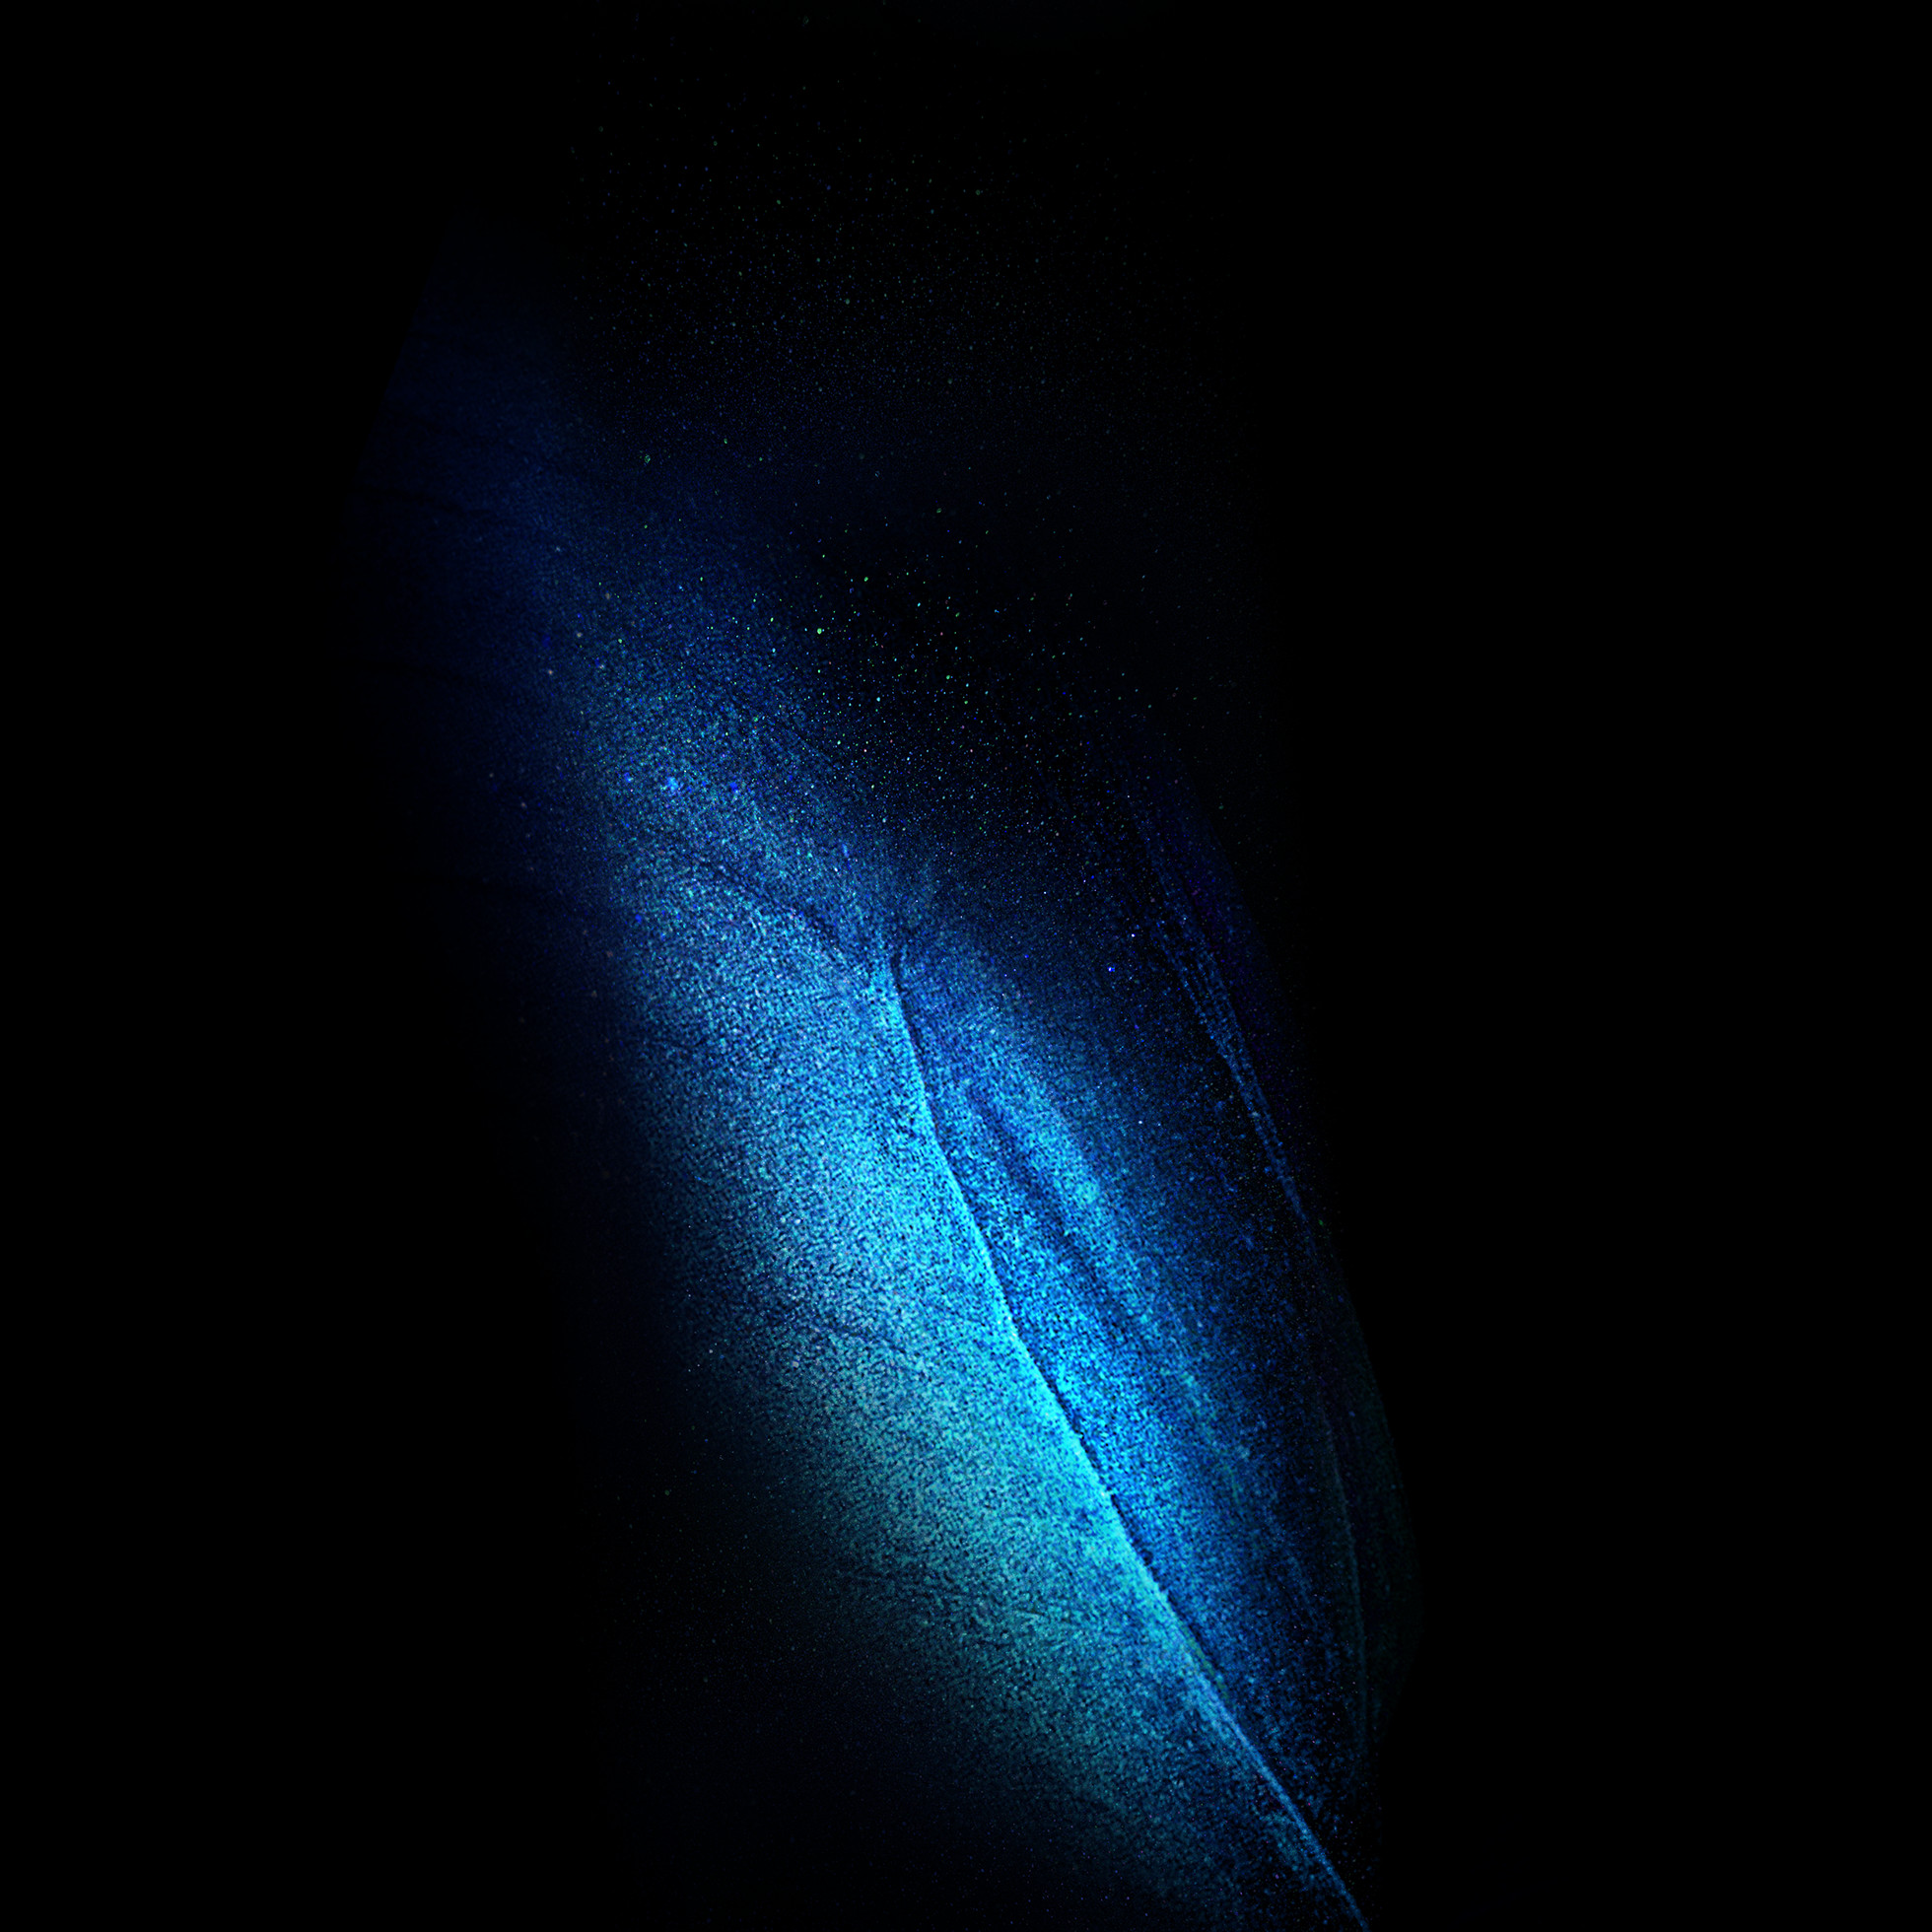 Samsung Galaxy Fold butterfly wallpaper in blue with one wing.